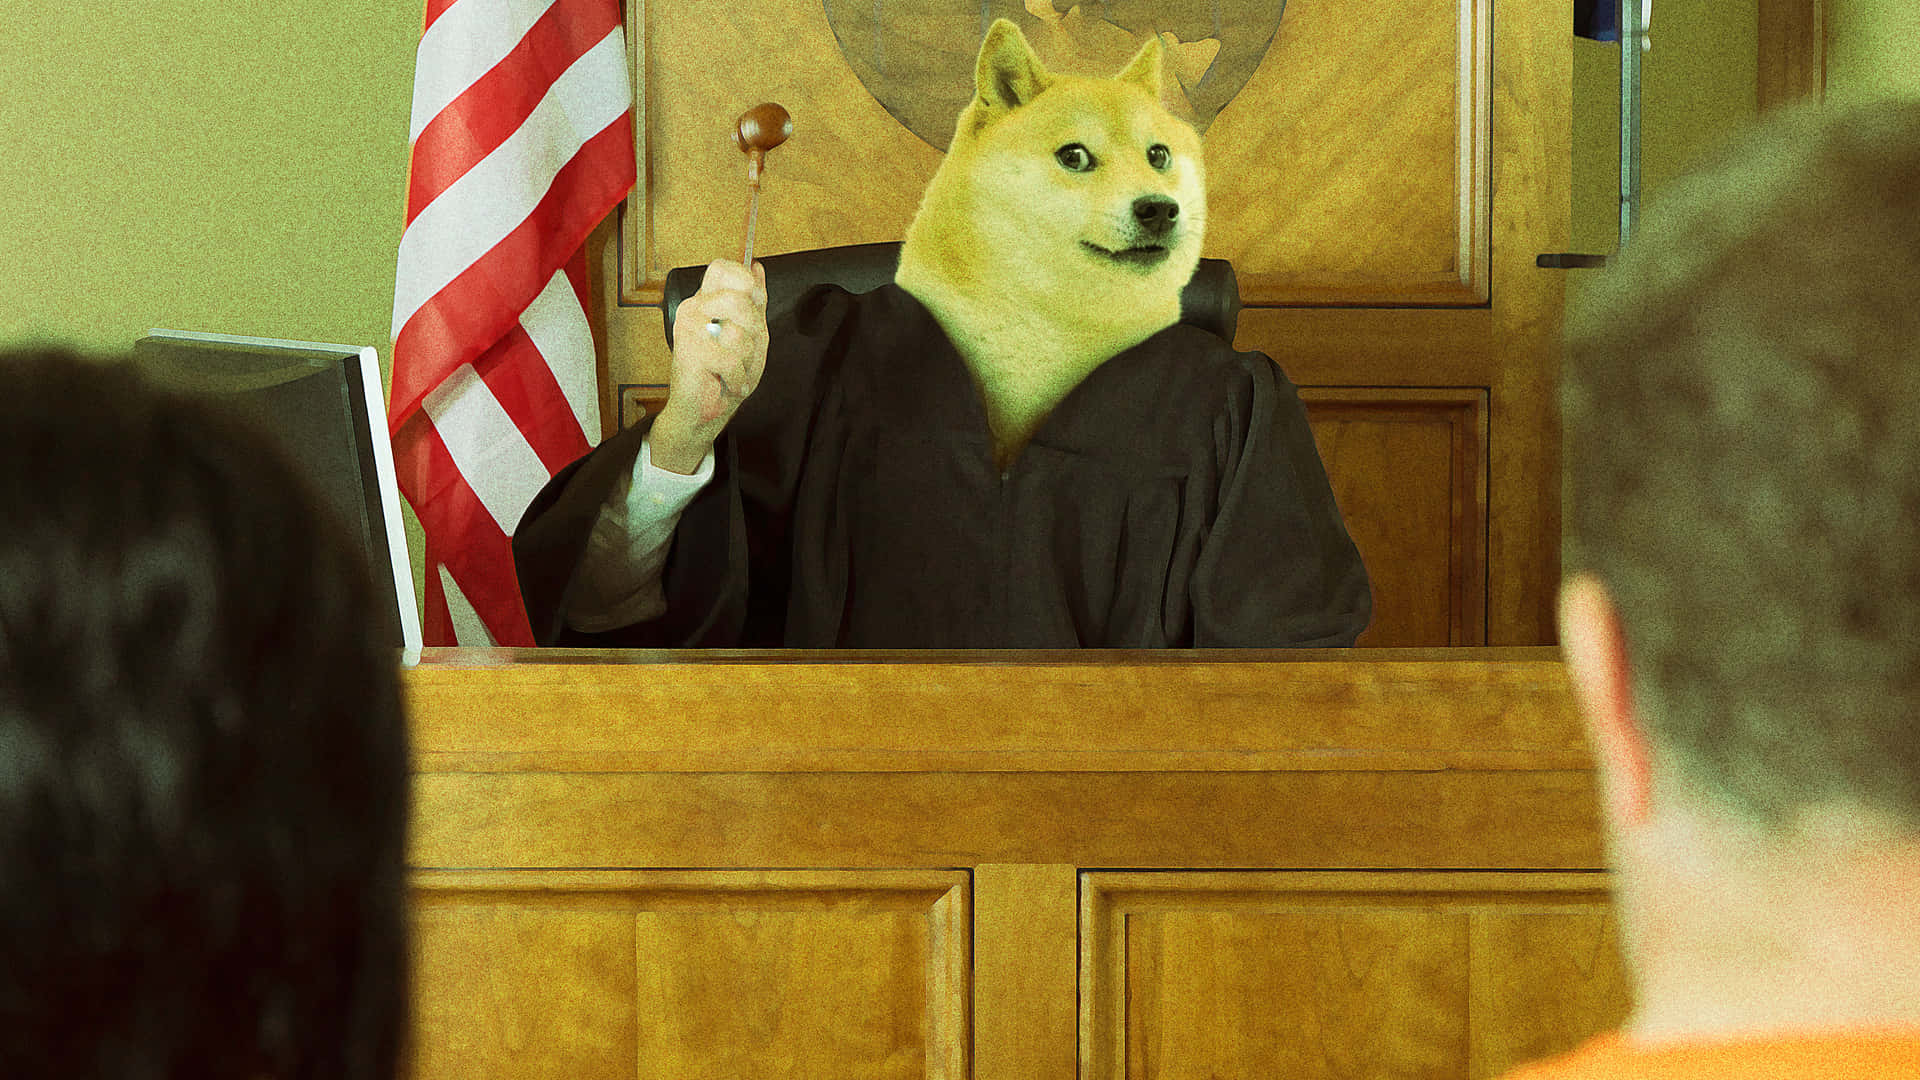 Doge Wearing Judge Robe And Glasses